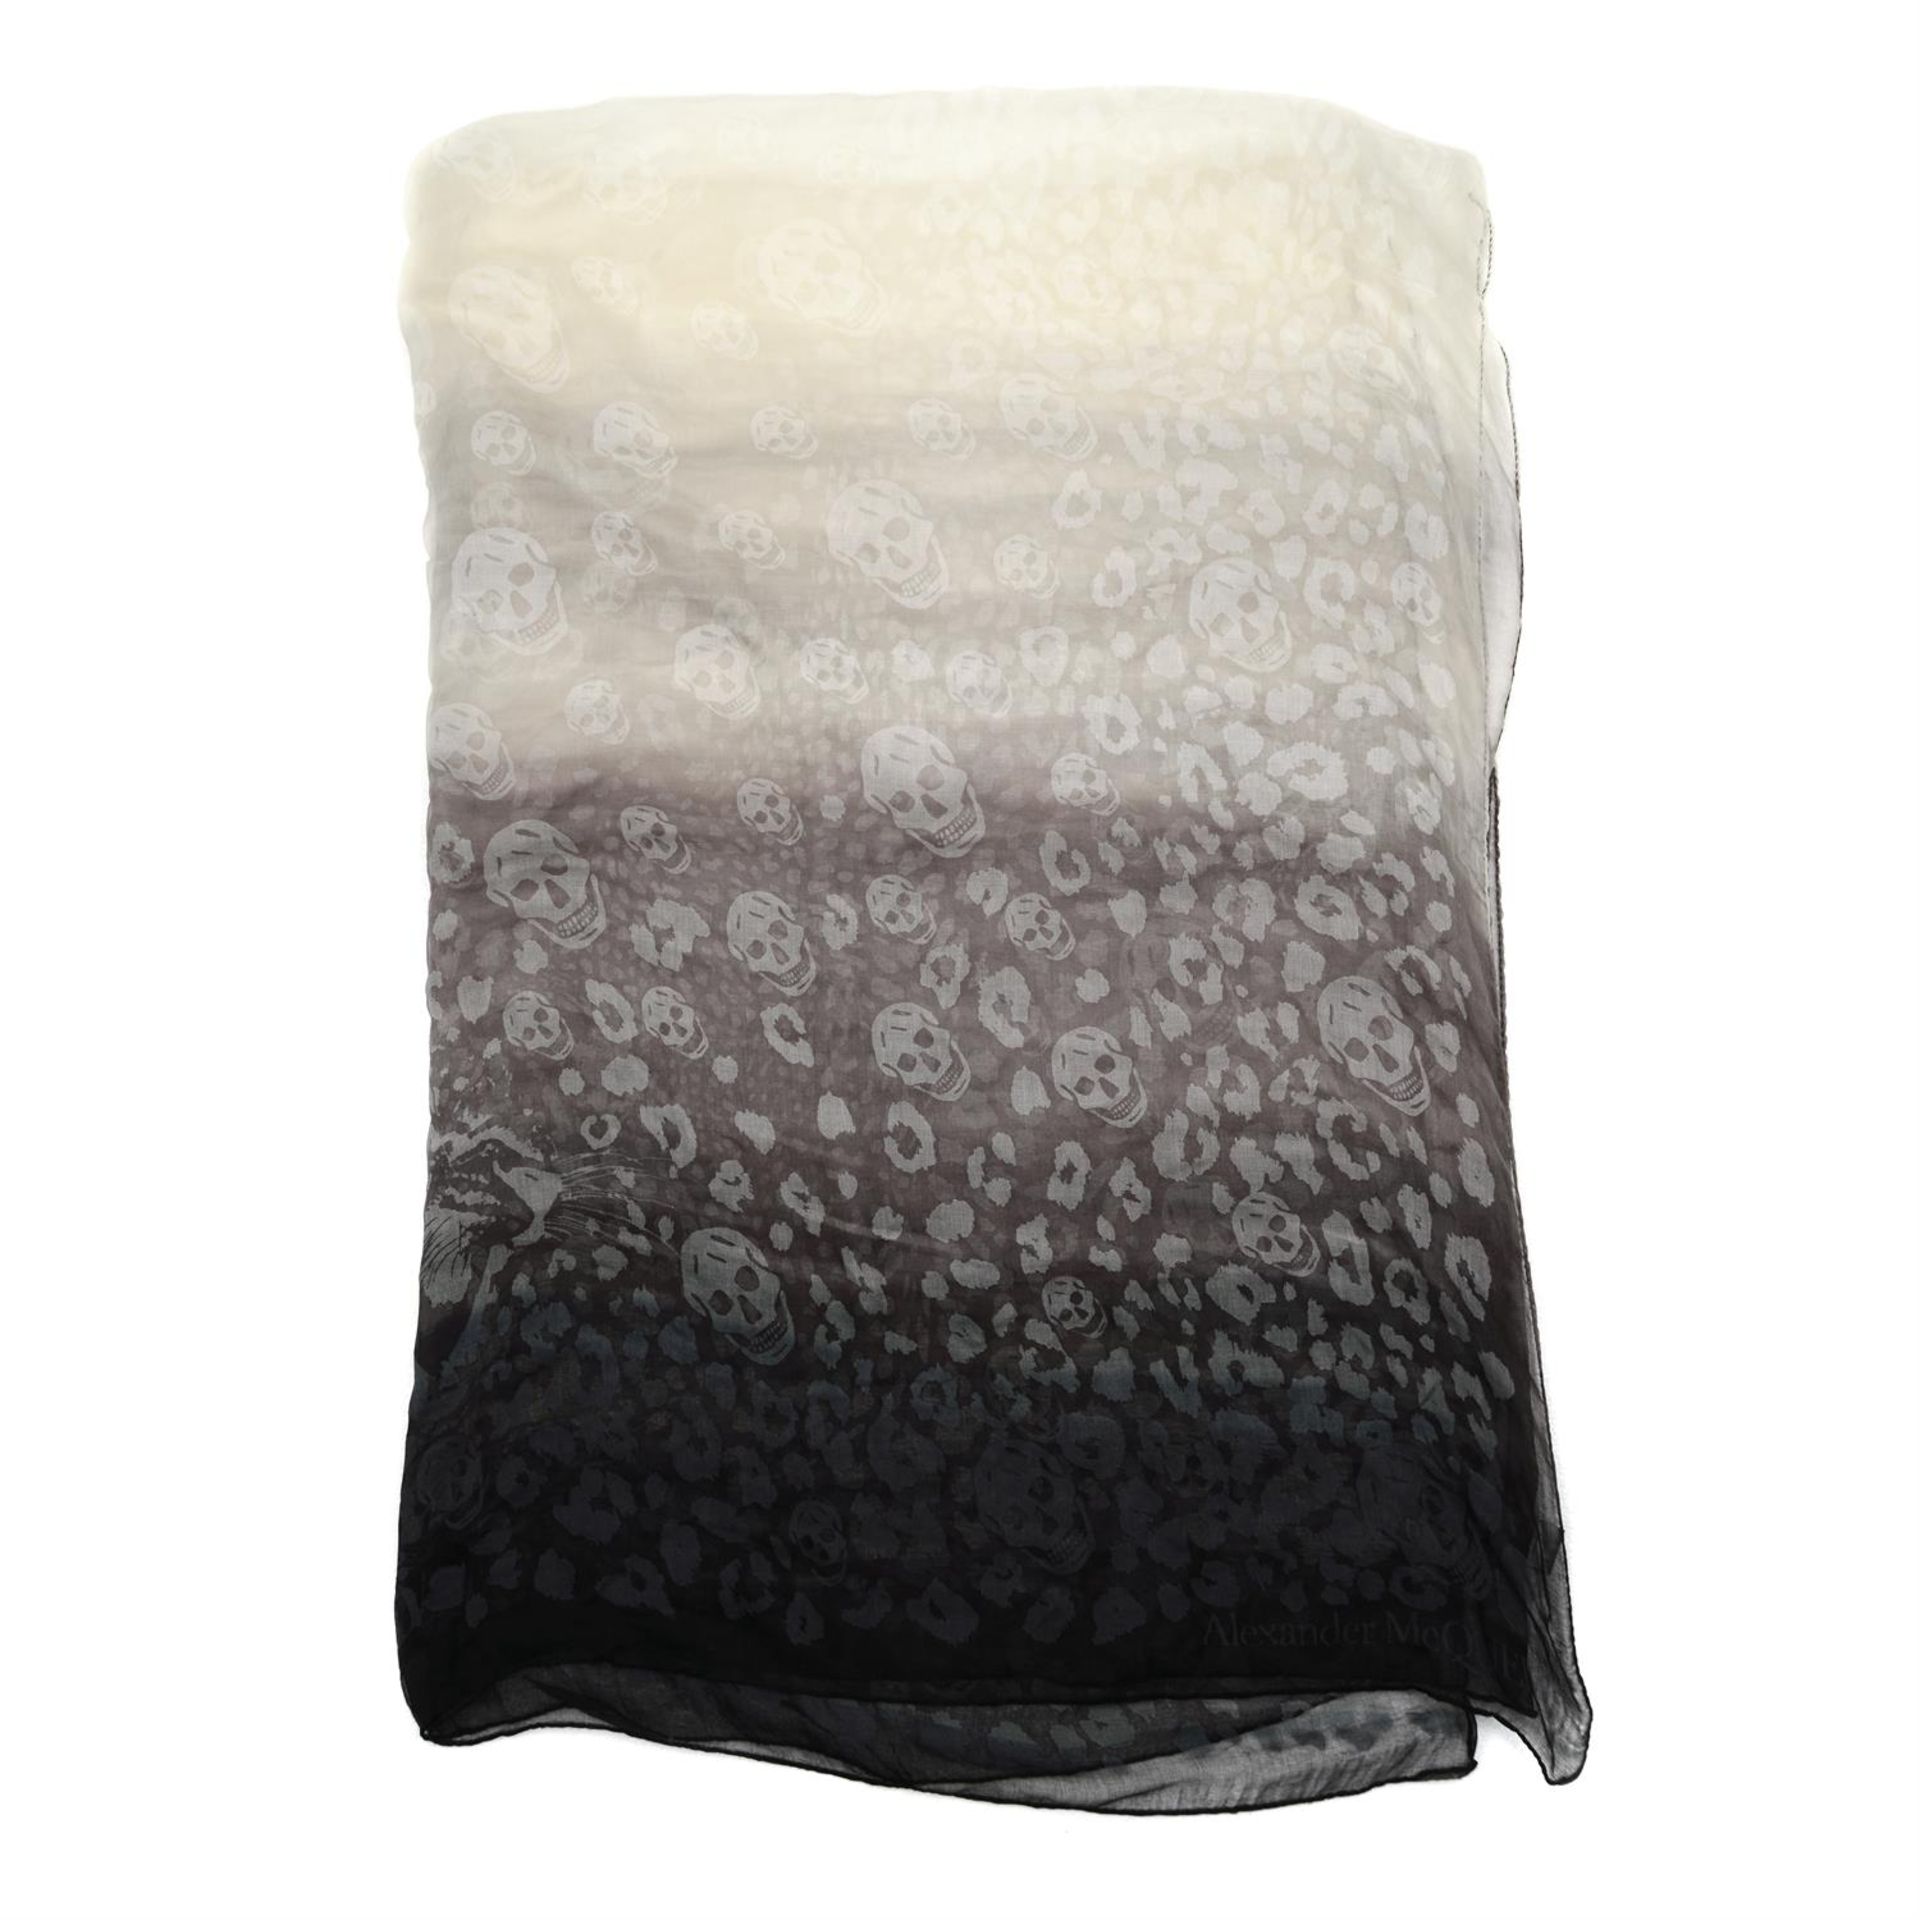 ALEXANDER MCQUEEN – a silk blend greyscale skull print stole. - Image 2 of 3